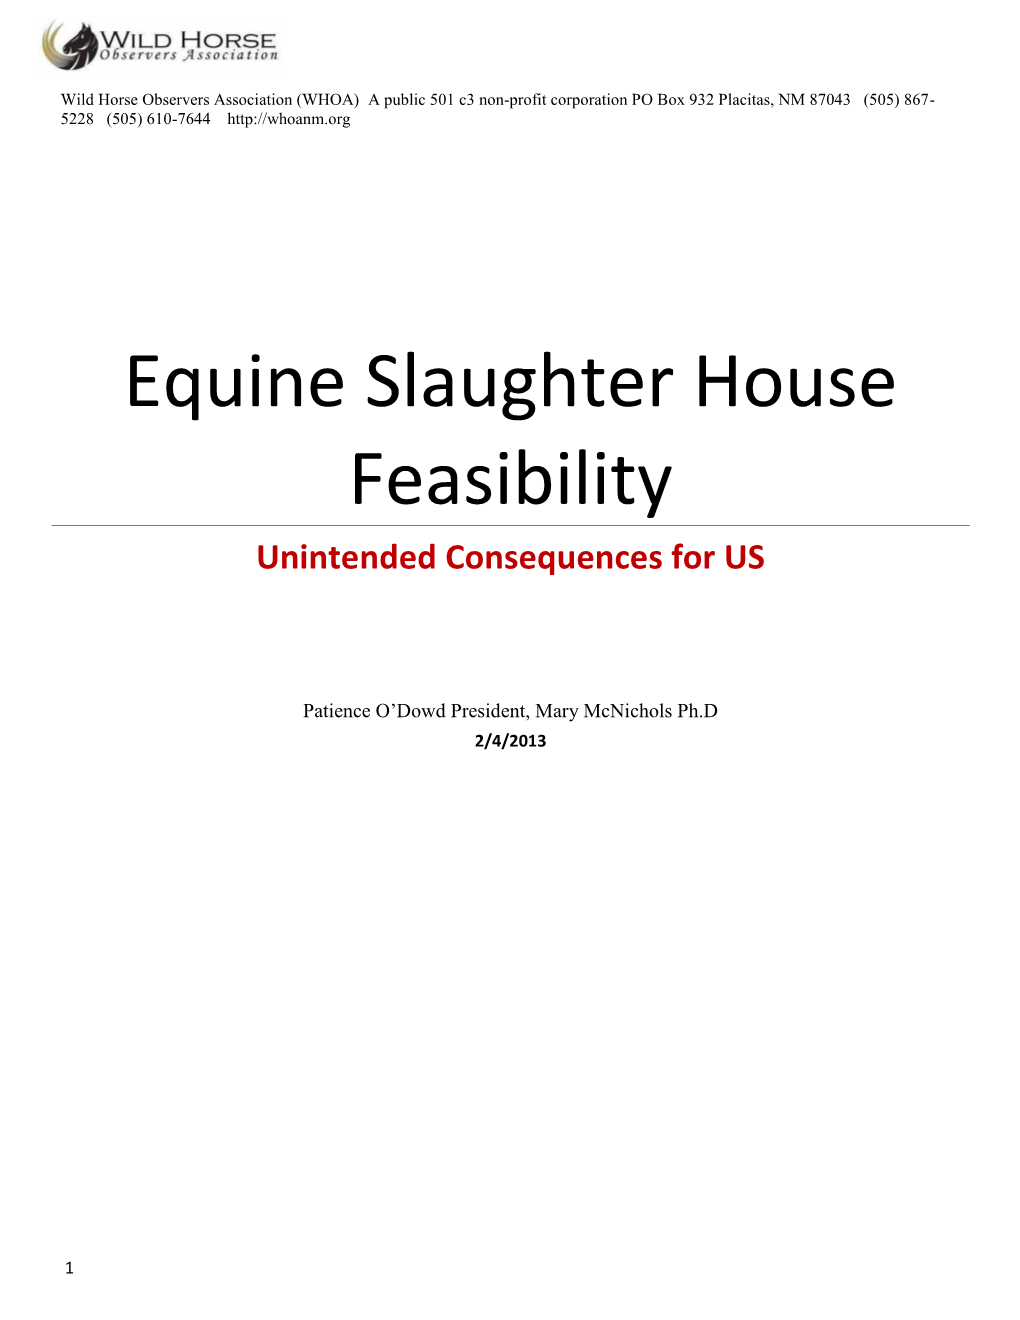 Equine Slaughter House Feasibility Unintended Consequences for US